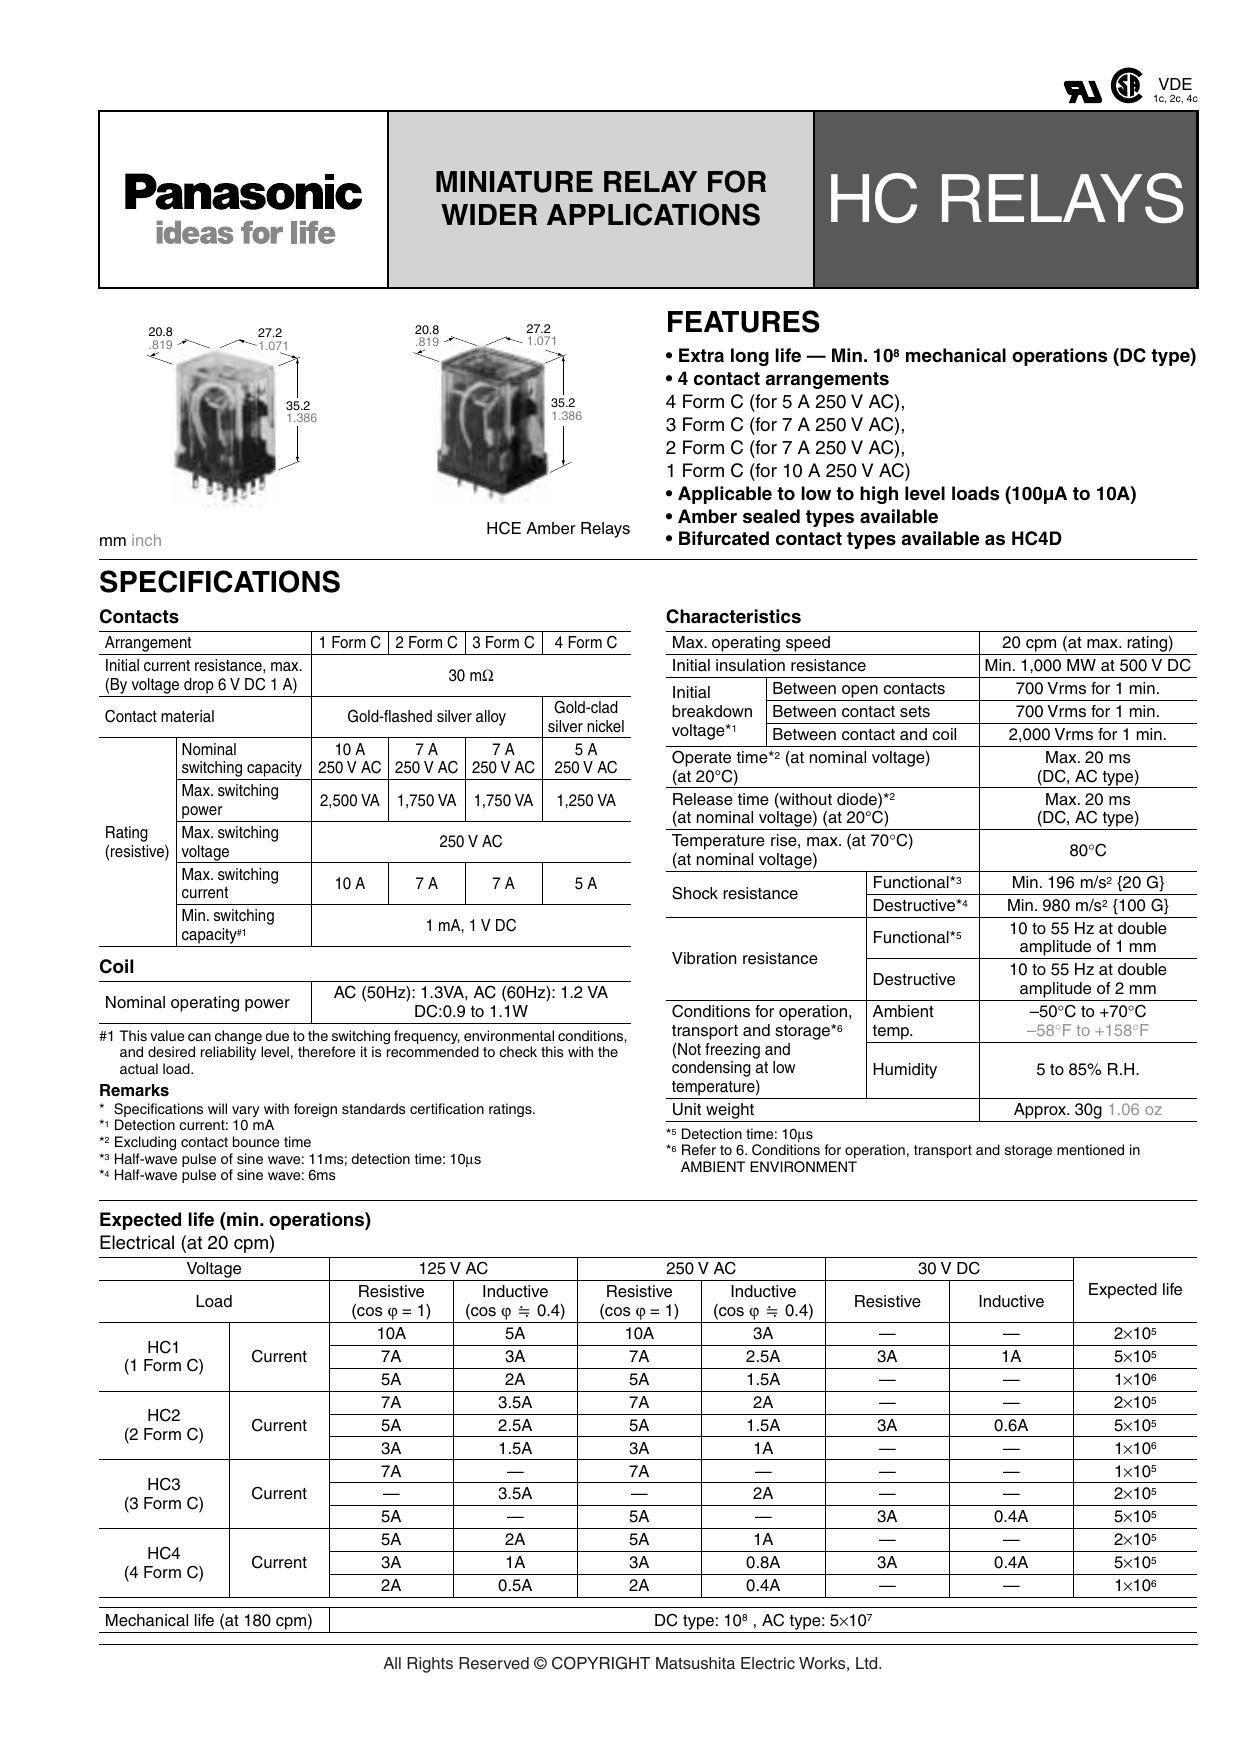 panasonic-miniature-relay-for-wider-applications-hc-relays.pdf